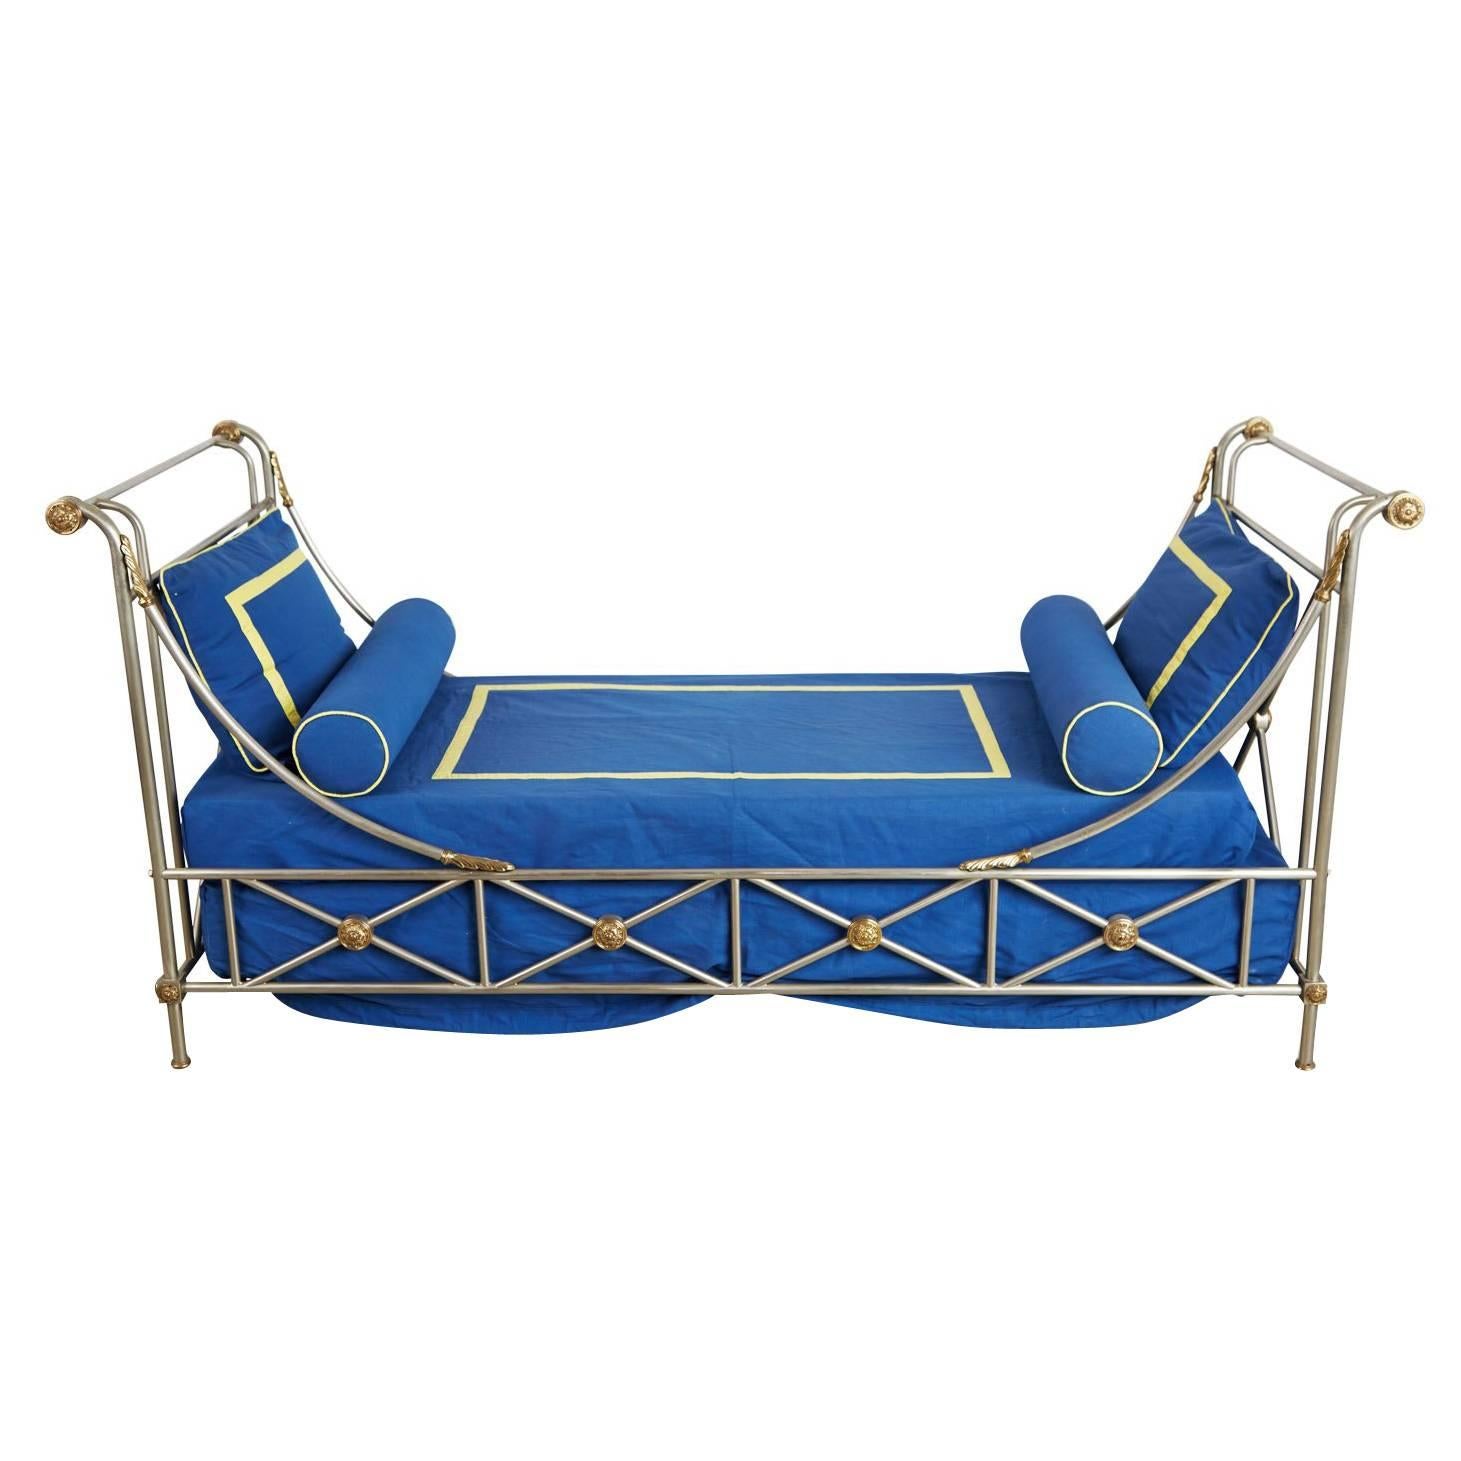 Maison Jansen Brass and Brushed Nickel Daybed, circa 1960s